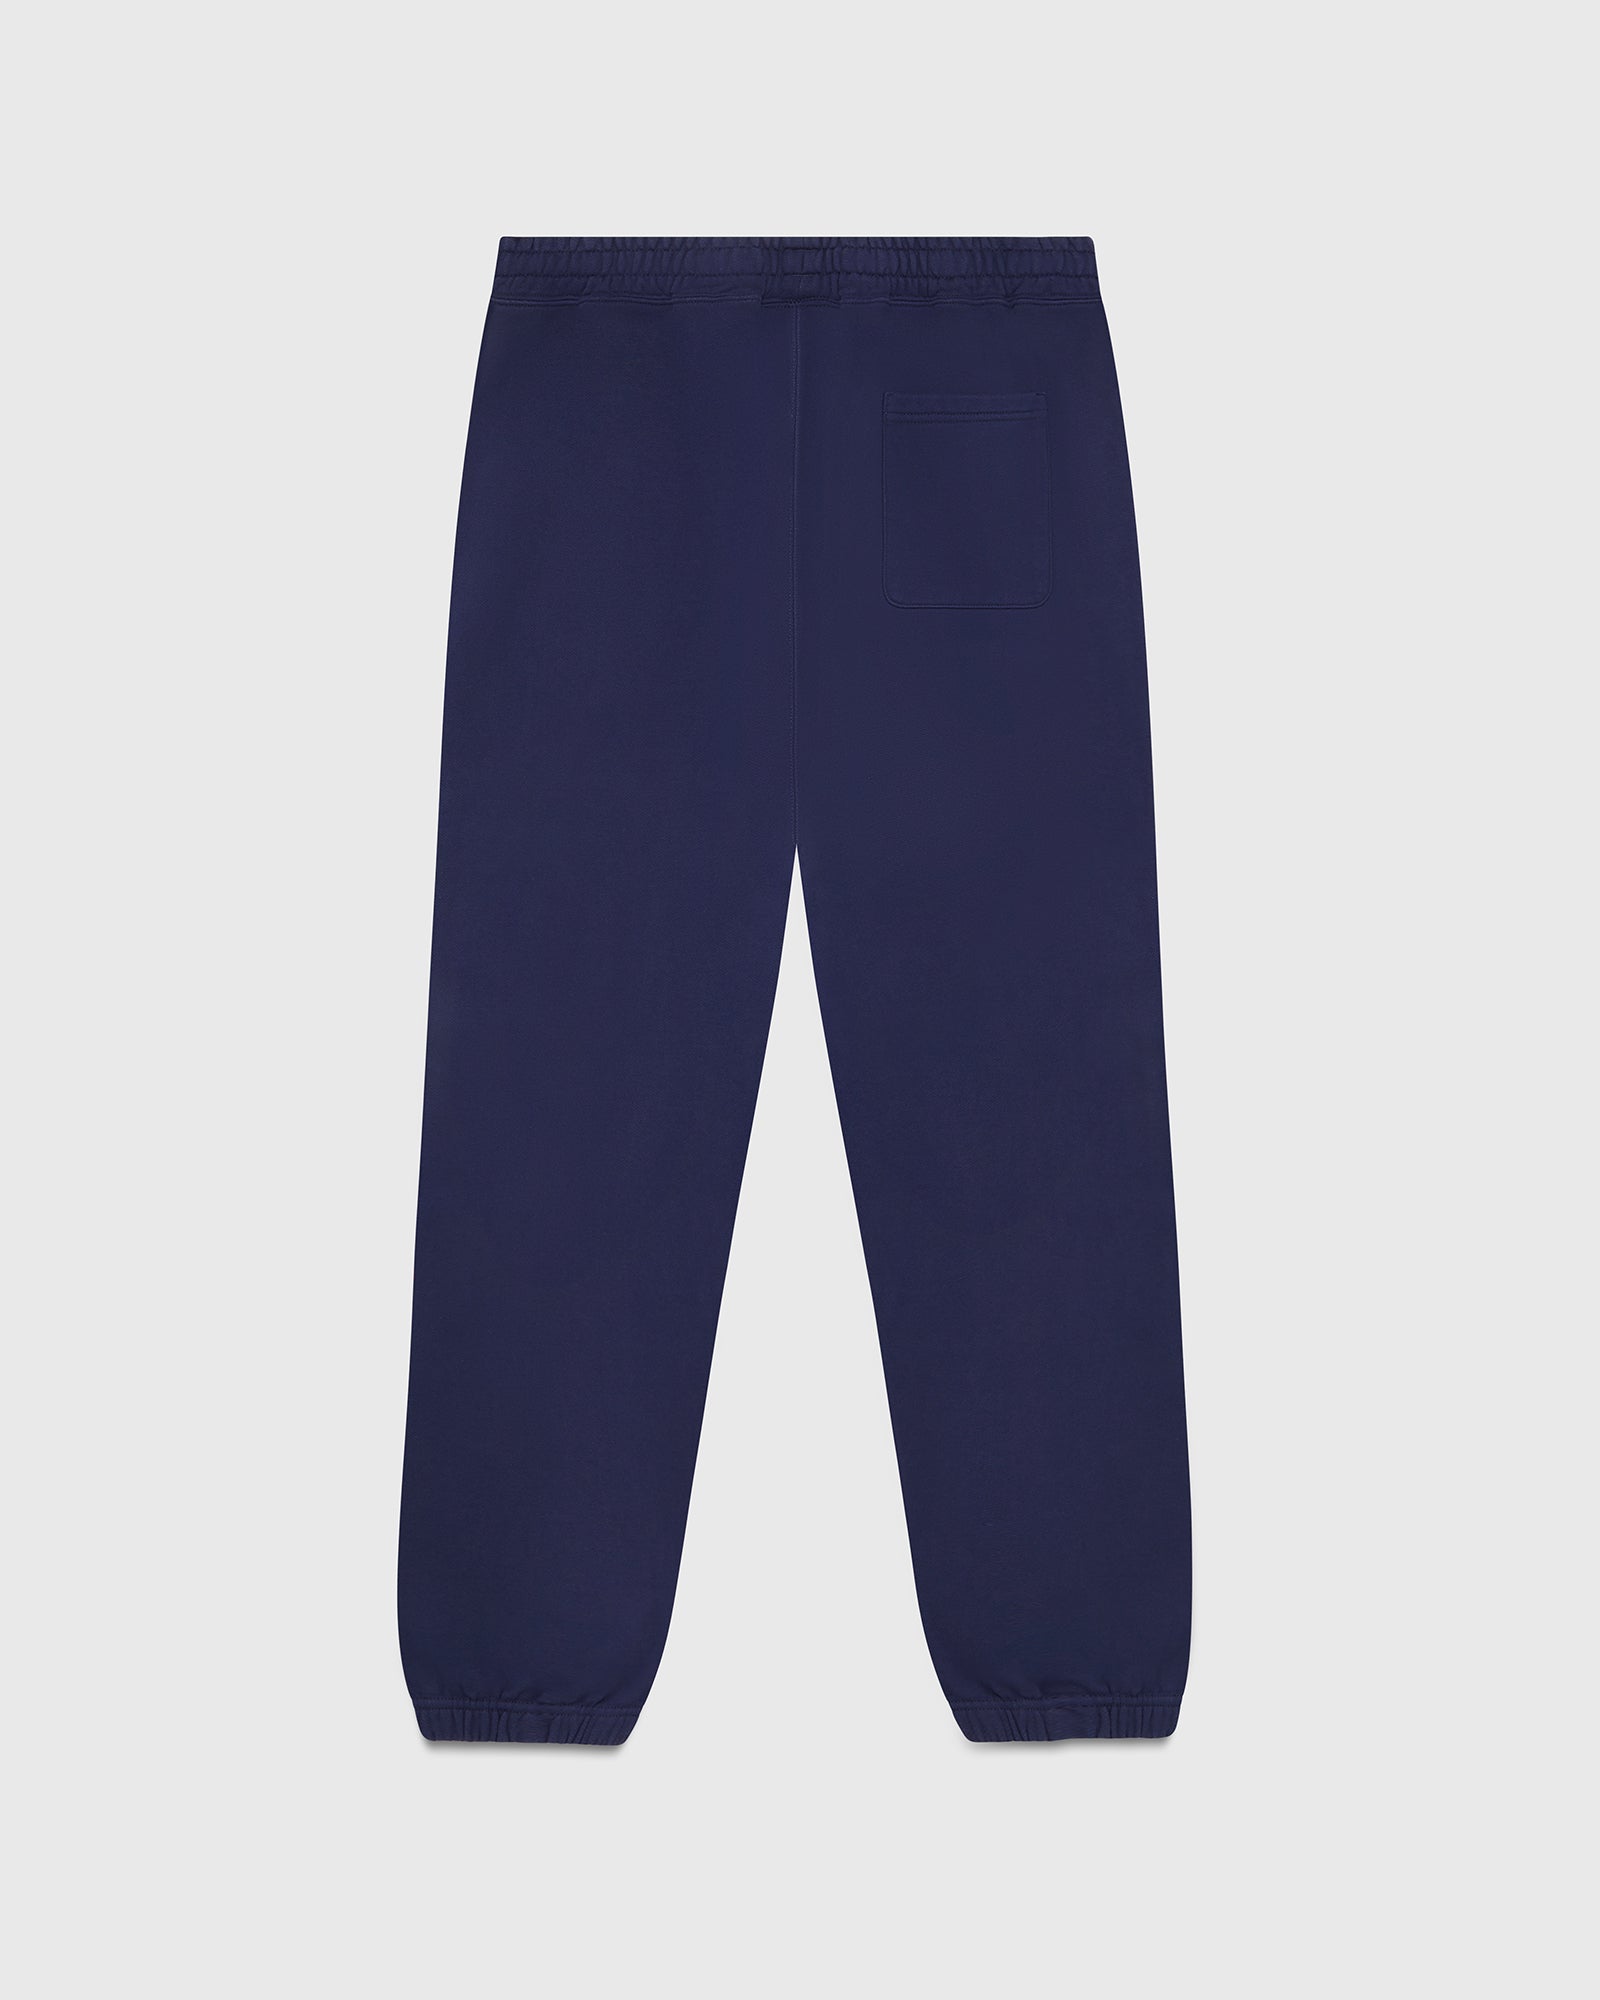 Classic Relaxed Fit Sweatpant - Navy - October's Very Own